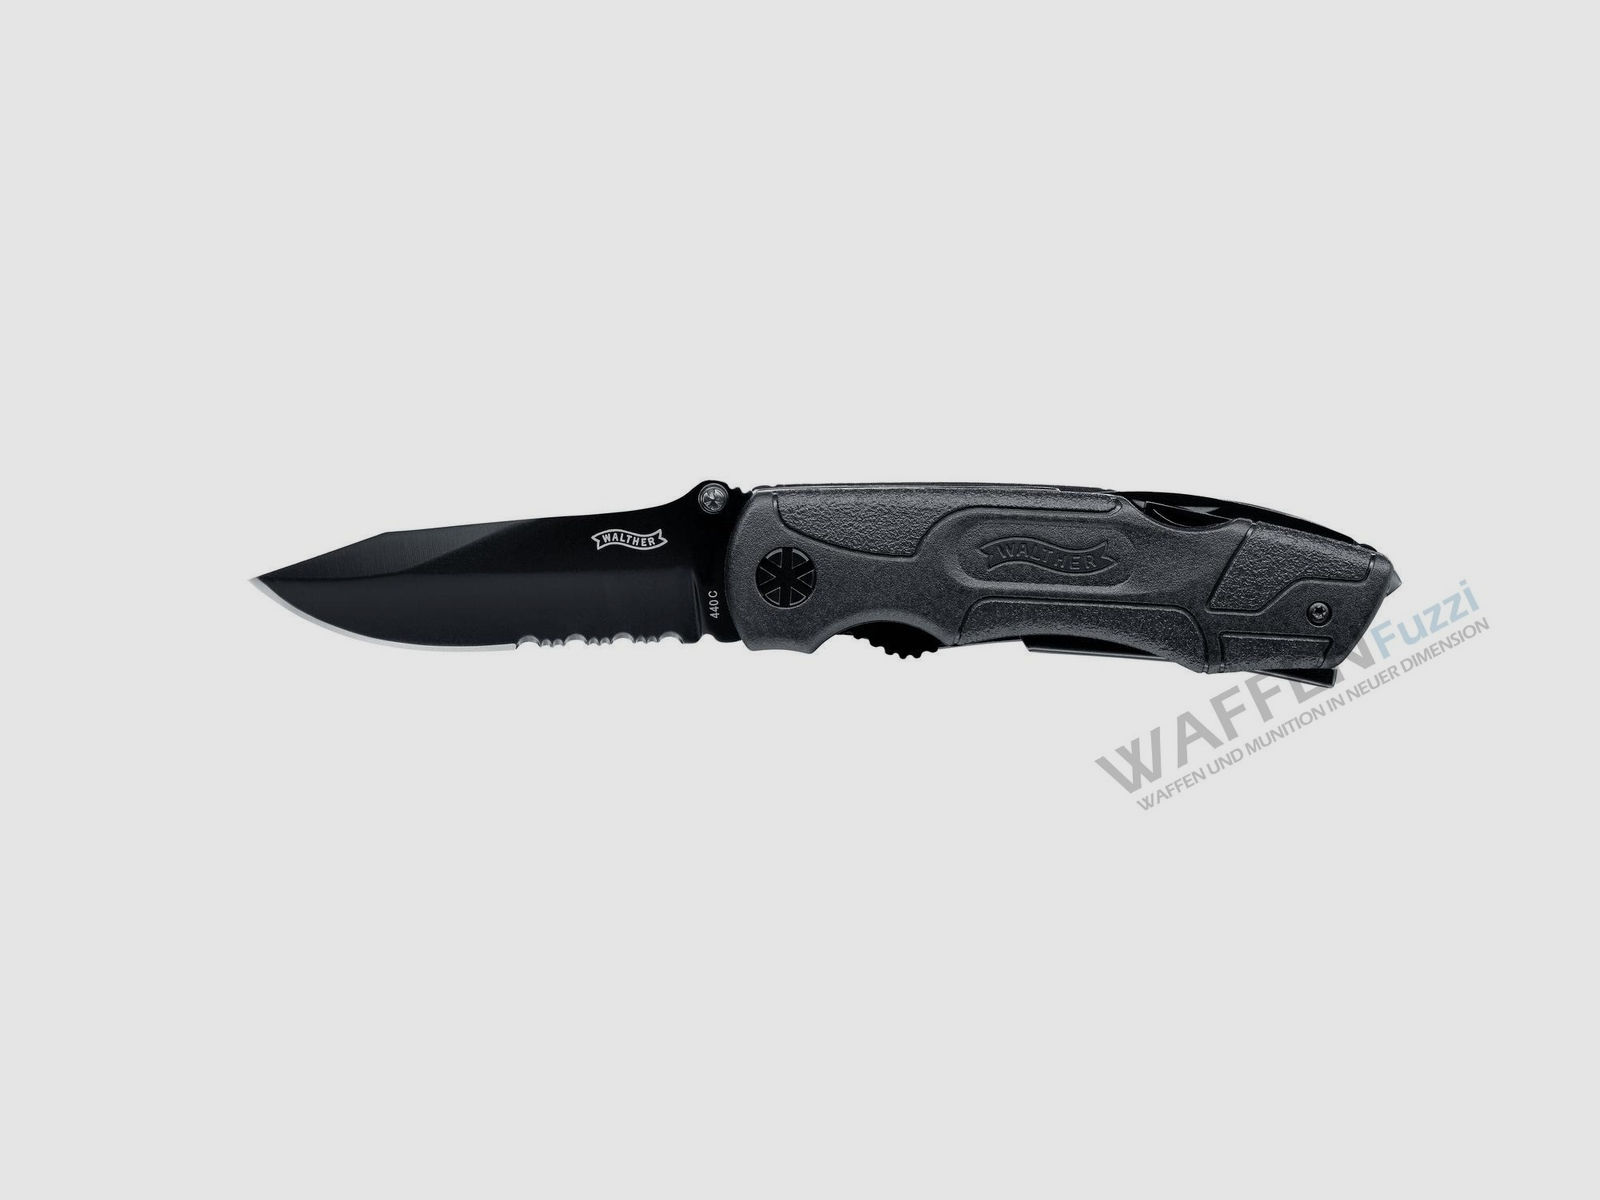 Walther MTK 2 Taschenmesser Multi Tac Knife